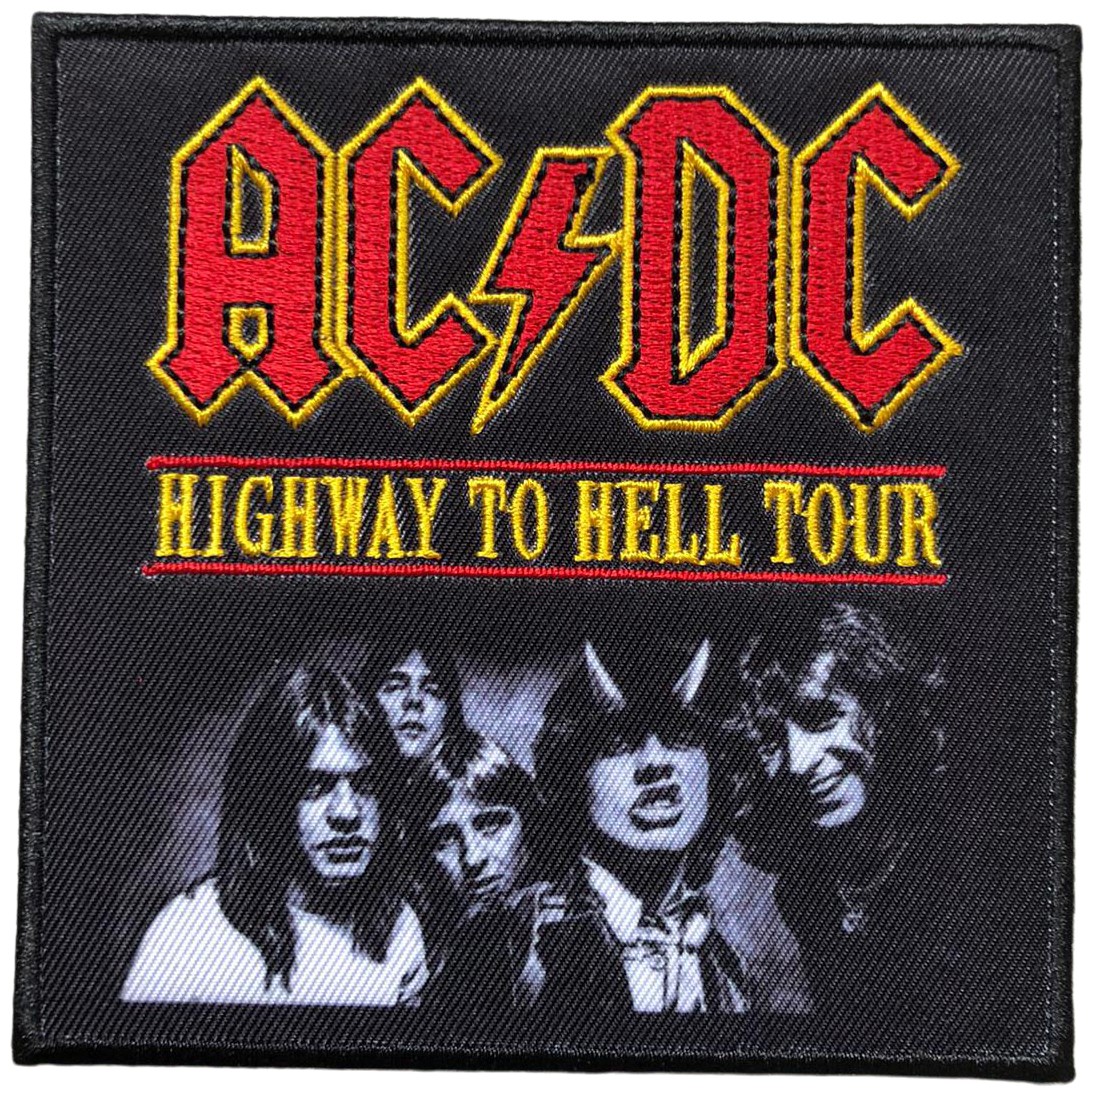 Ac / Dc - Highway To Hell Tour